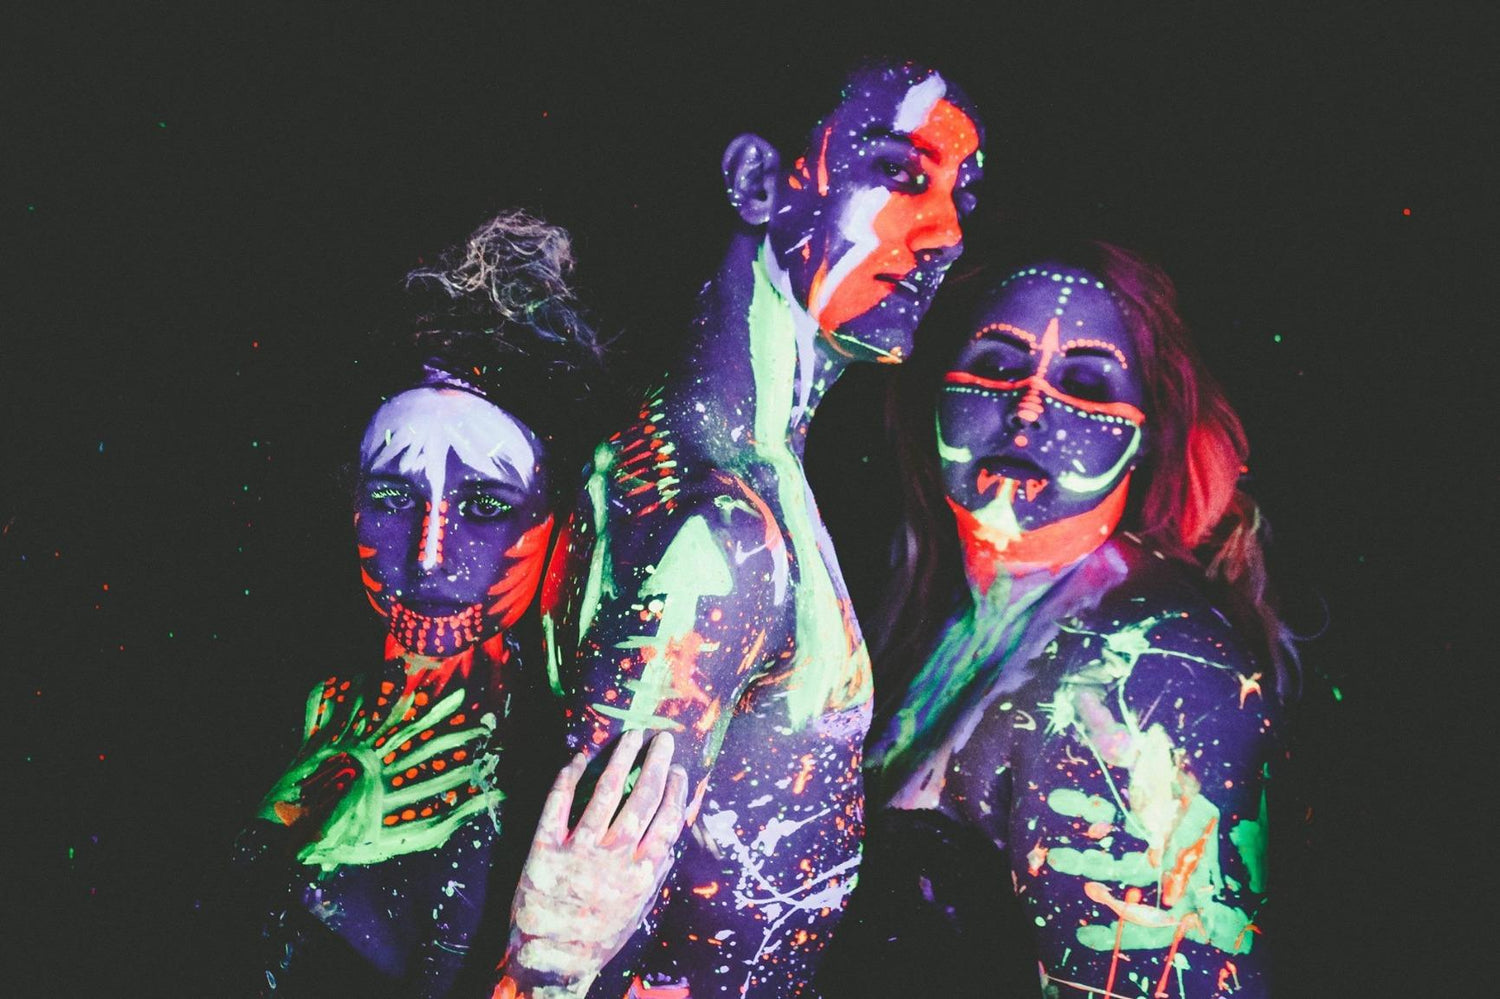 I heard that you like glow in the dark body paint. Here are some